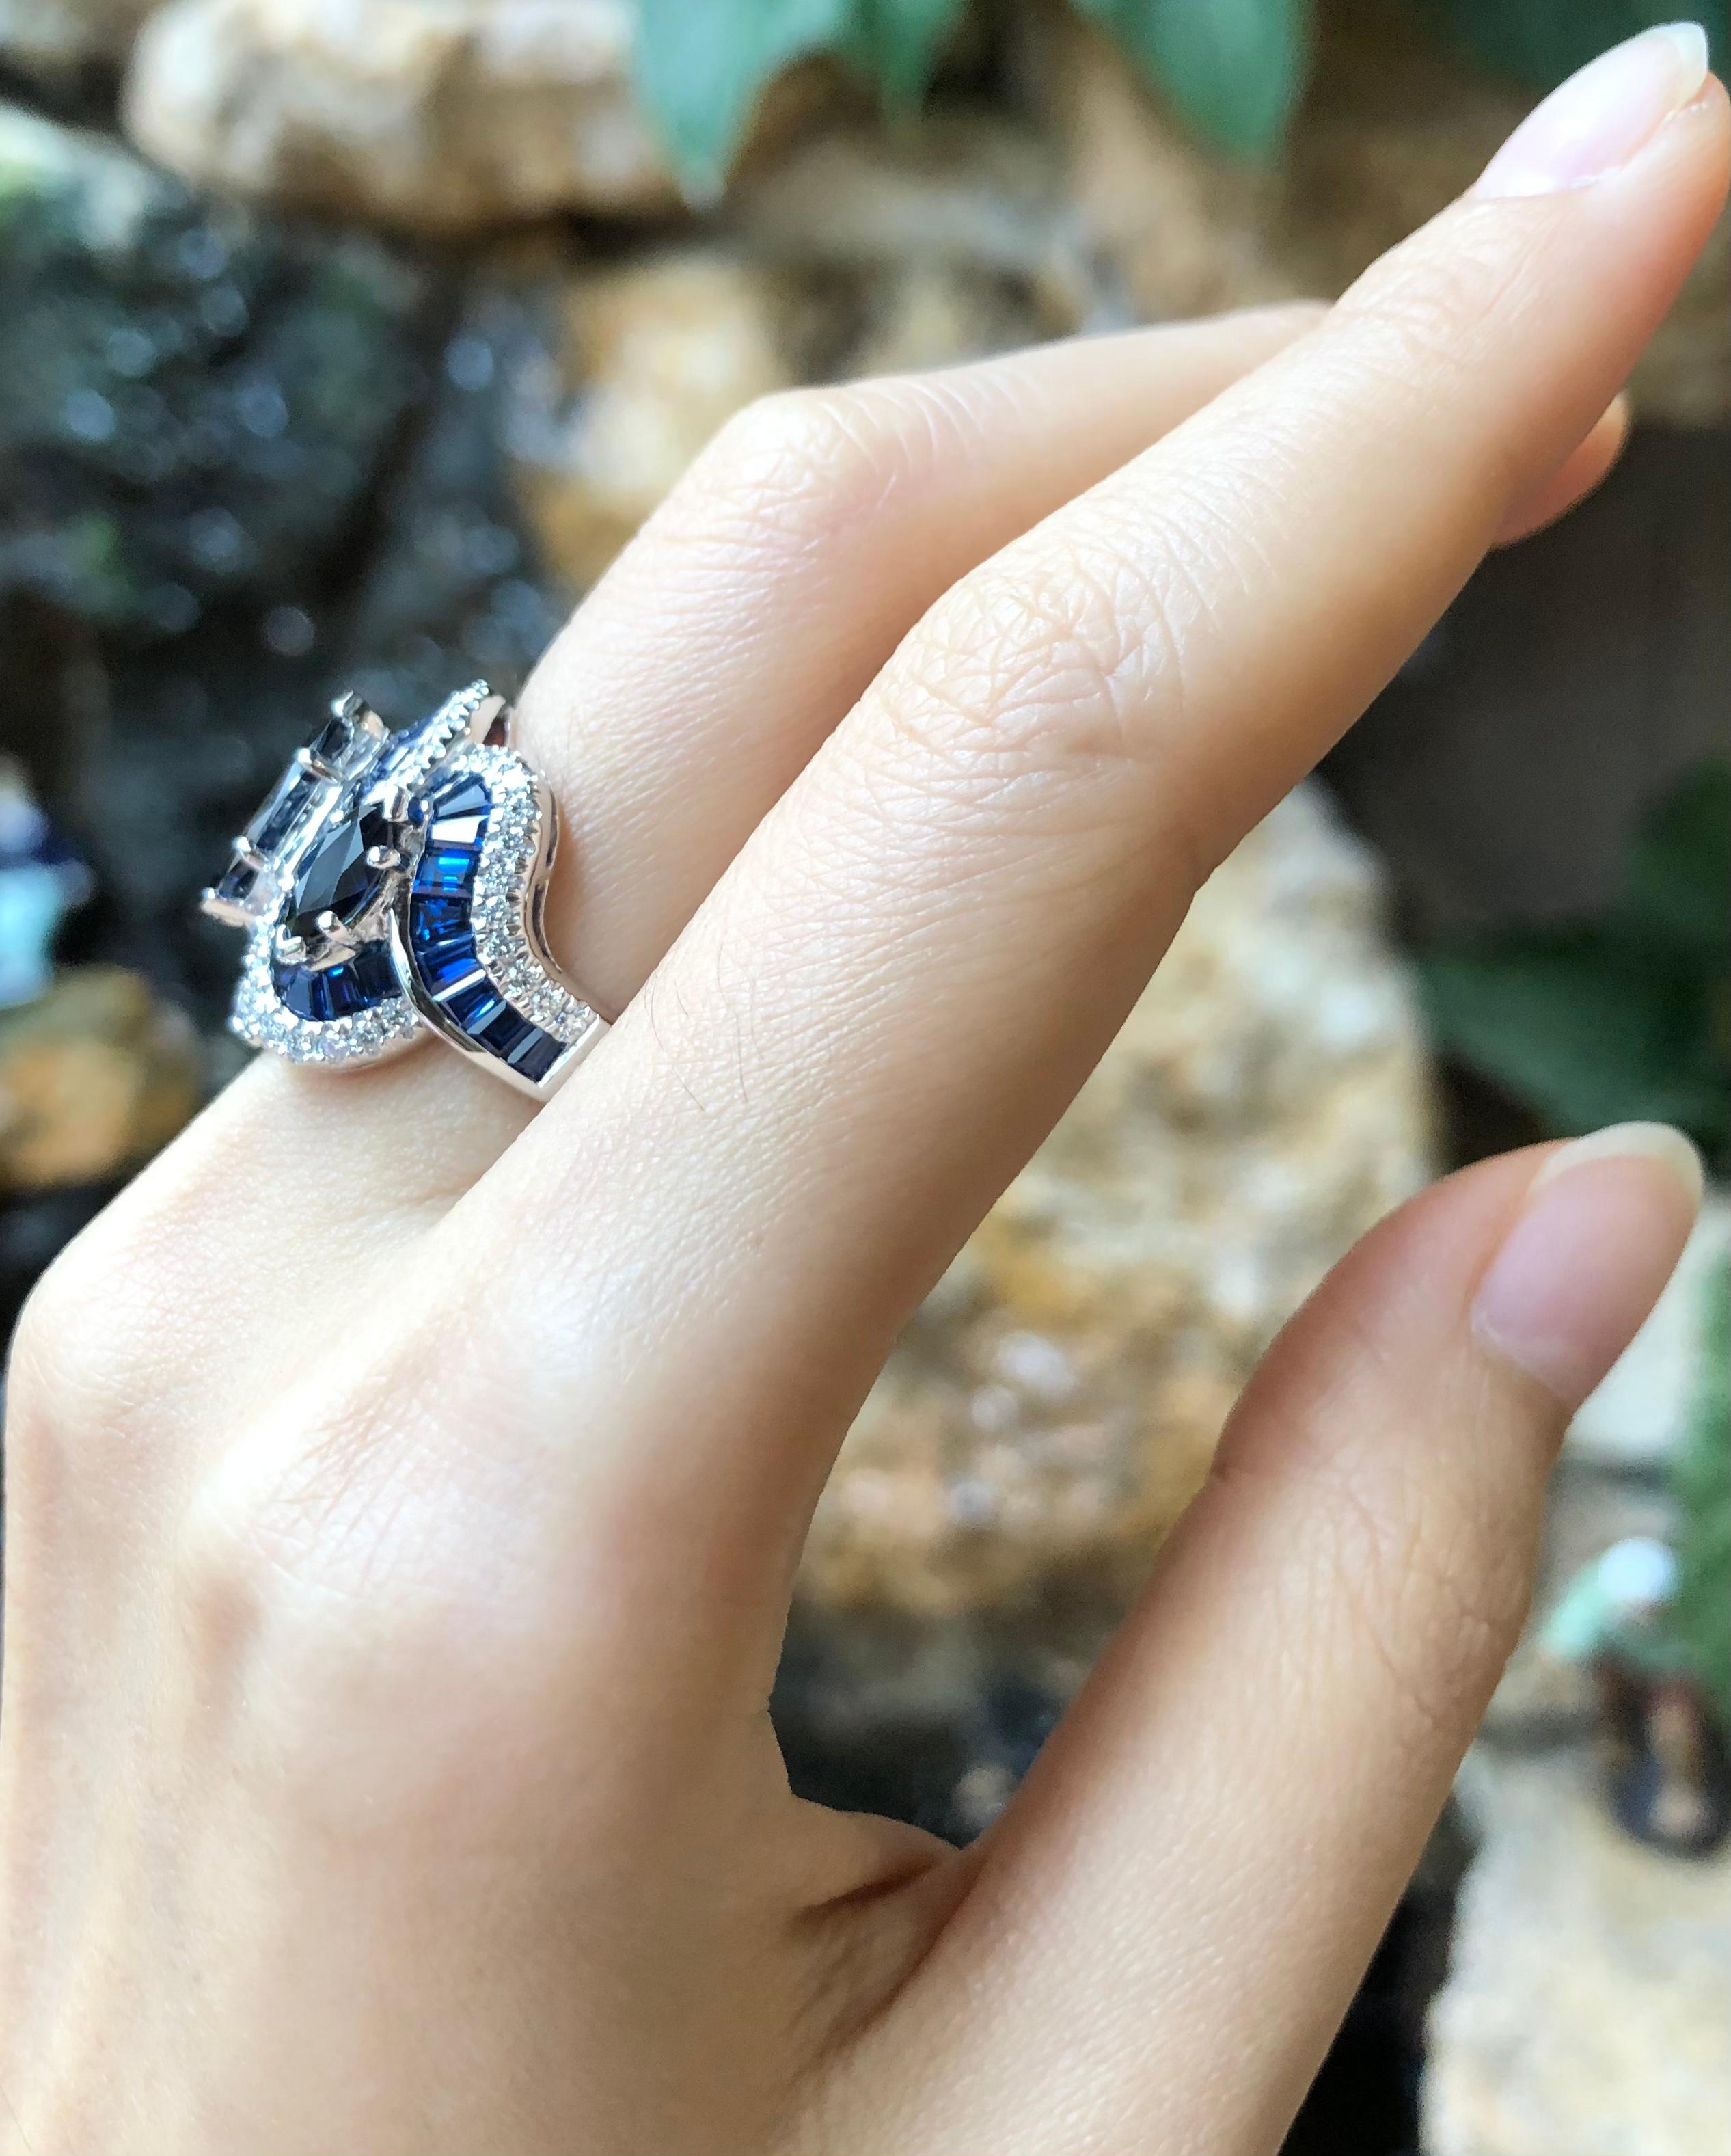 Blue Sapphire 1.93 carats (Center Marquise) with Blue Sapphire 1.55 cts (Total Side Marquises) with Sapphire 7.92 carats (Total Baguette) and Diamond 0.57 carat Ring set in 18 Karat White Gold Settings

Width:  2.0 cm 
Length:  2.0 cm
Ring Size: